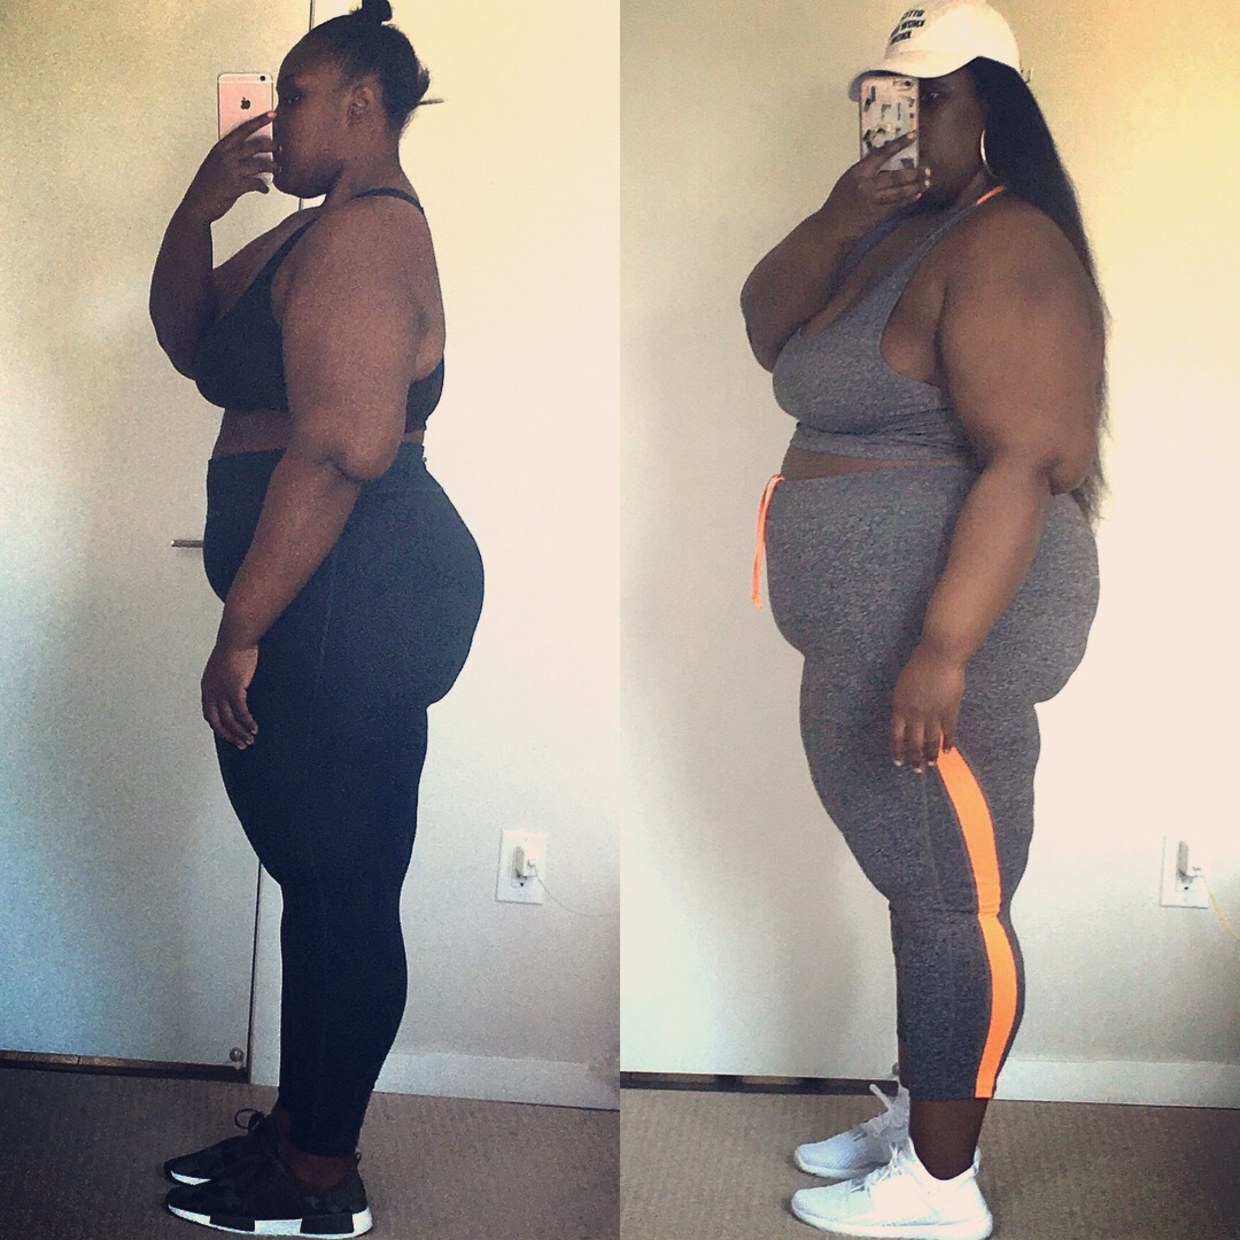 5 tips from a woman who lost more than 200 pounds - Good Morning America